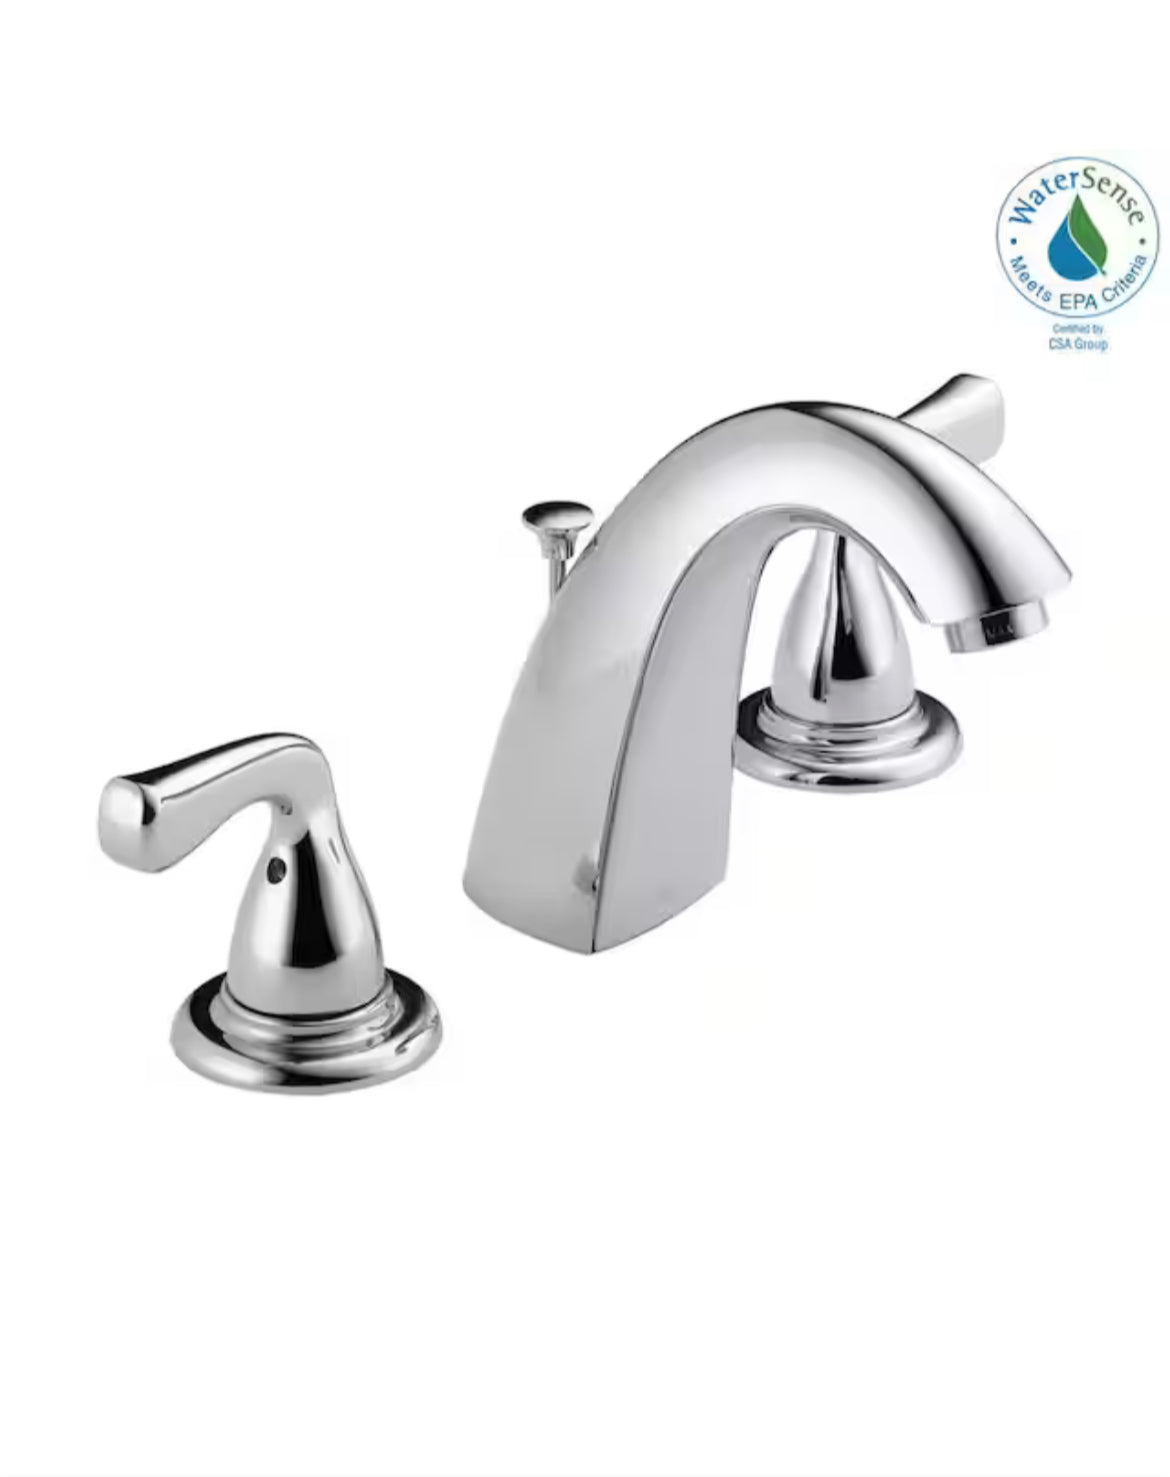 Foundations 8 in. Widespread 2-Handle Bathroom Faucet in Chrome, Delta